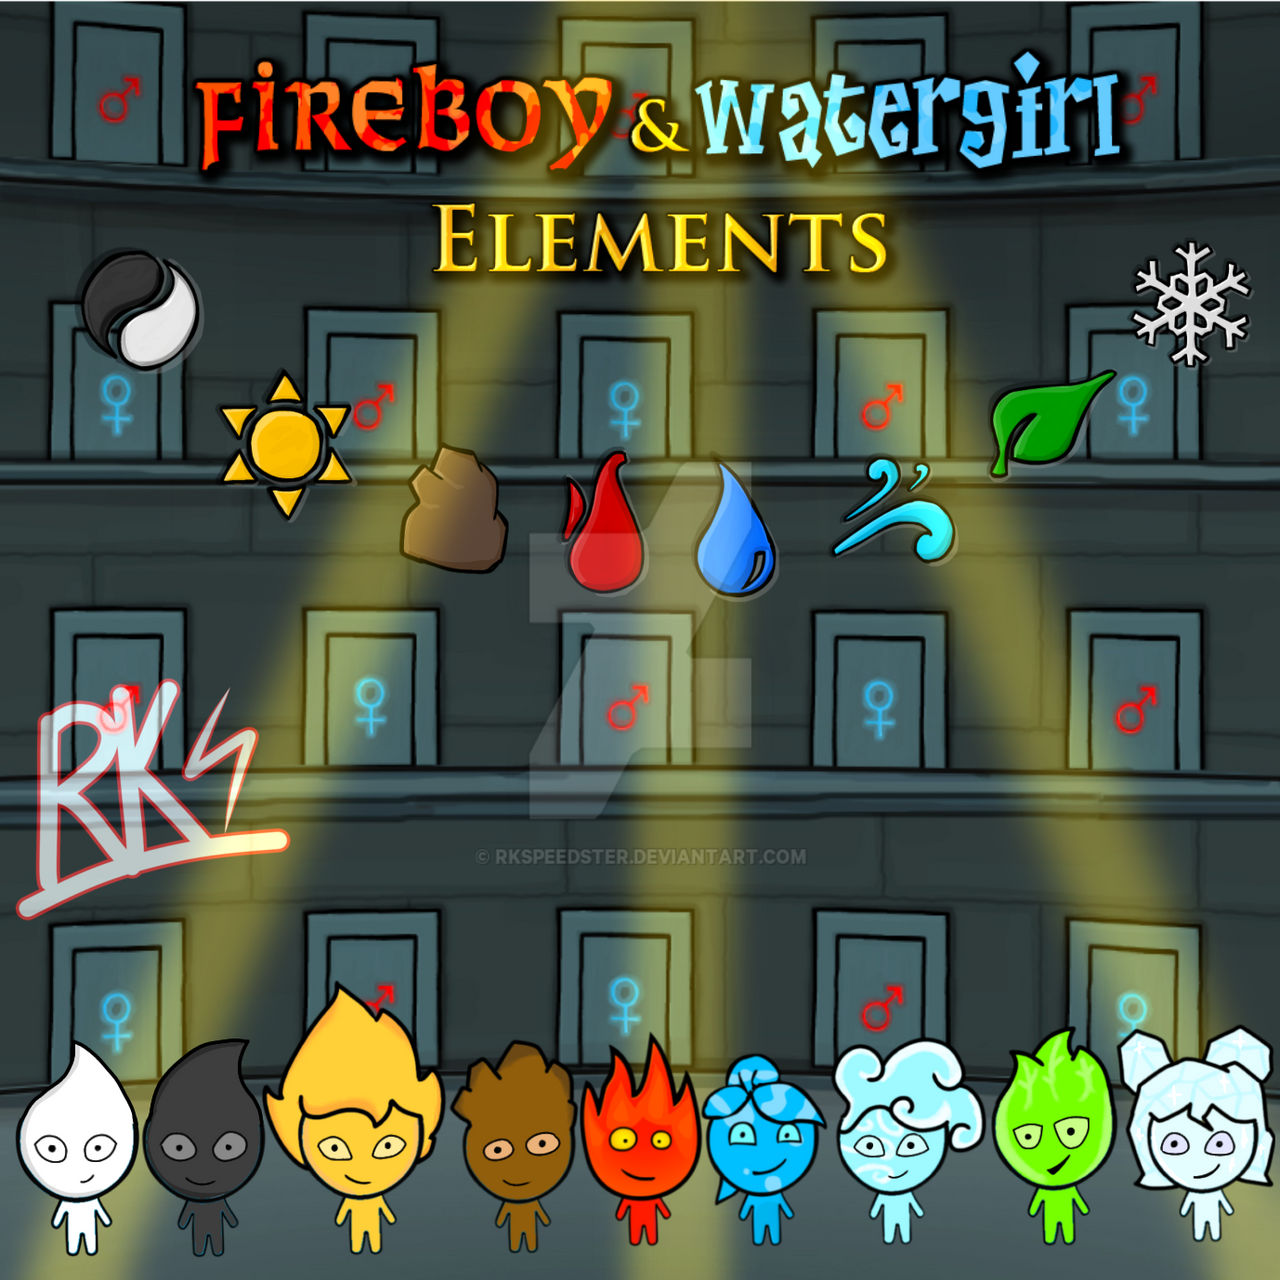 Fireboy and Watergirl 5: Elements - Free Play & No Download